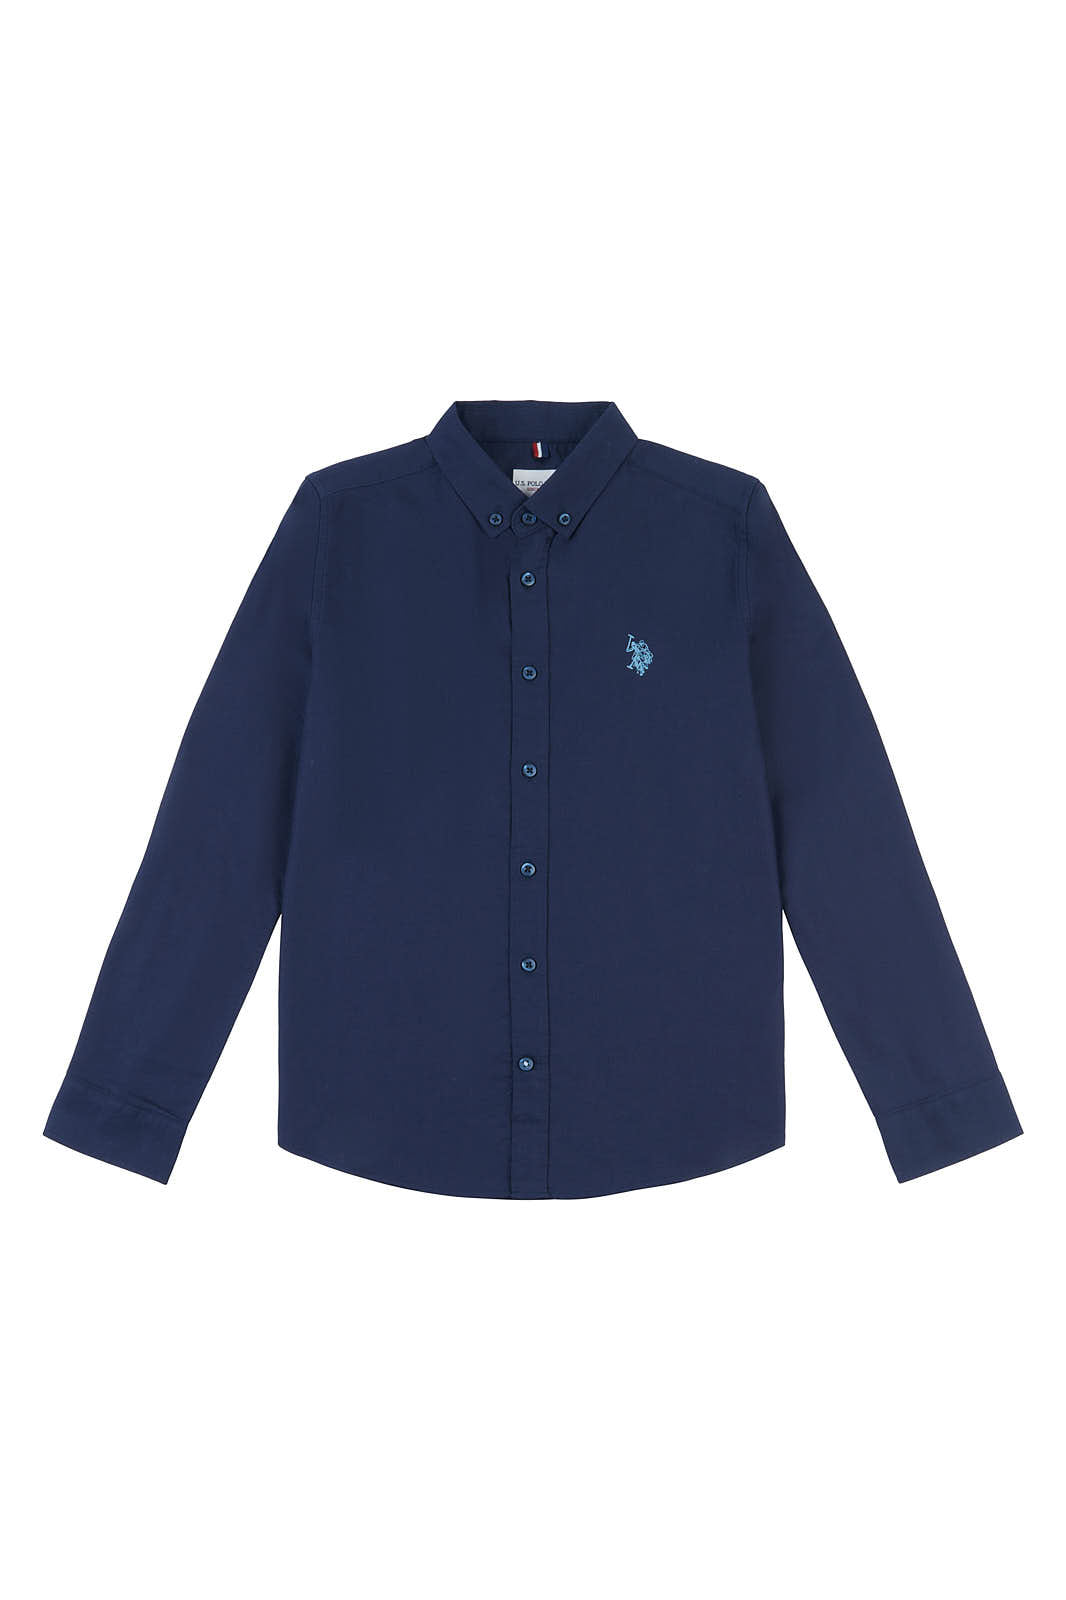 Boys Peached Oxford Shirt in Navy Blue